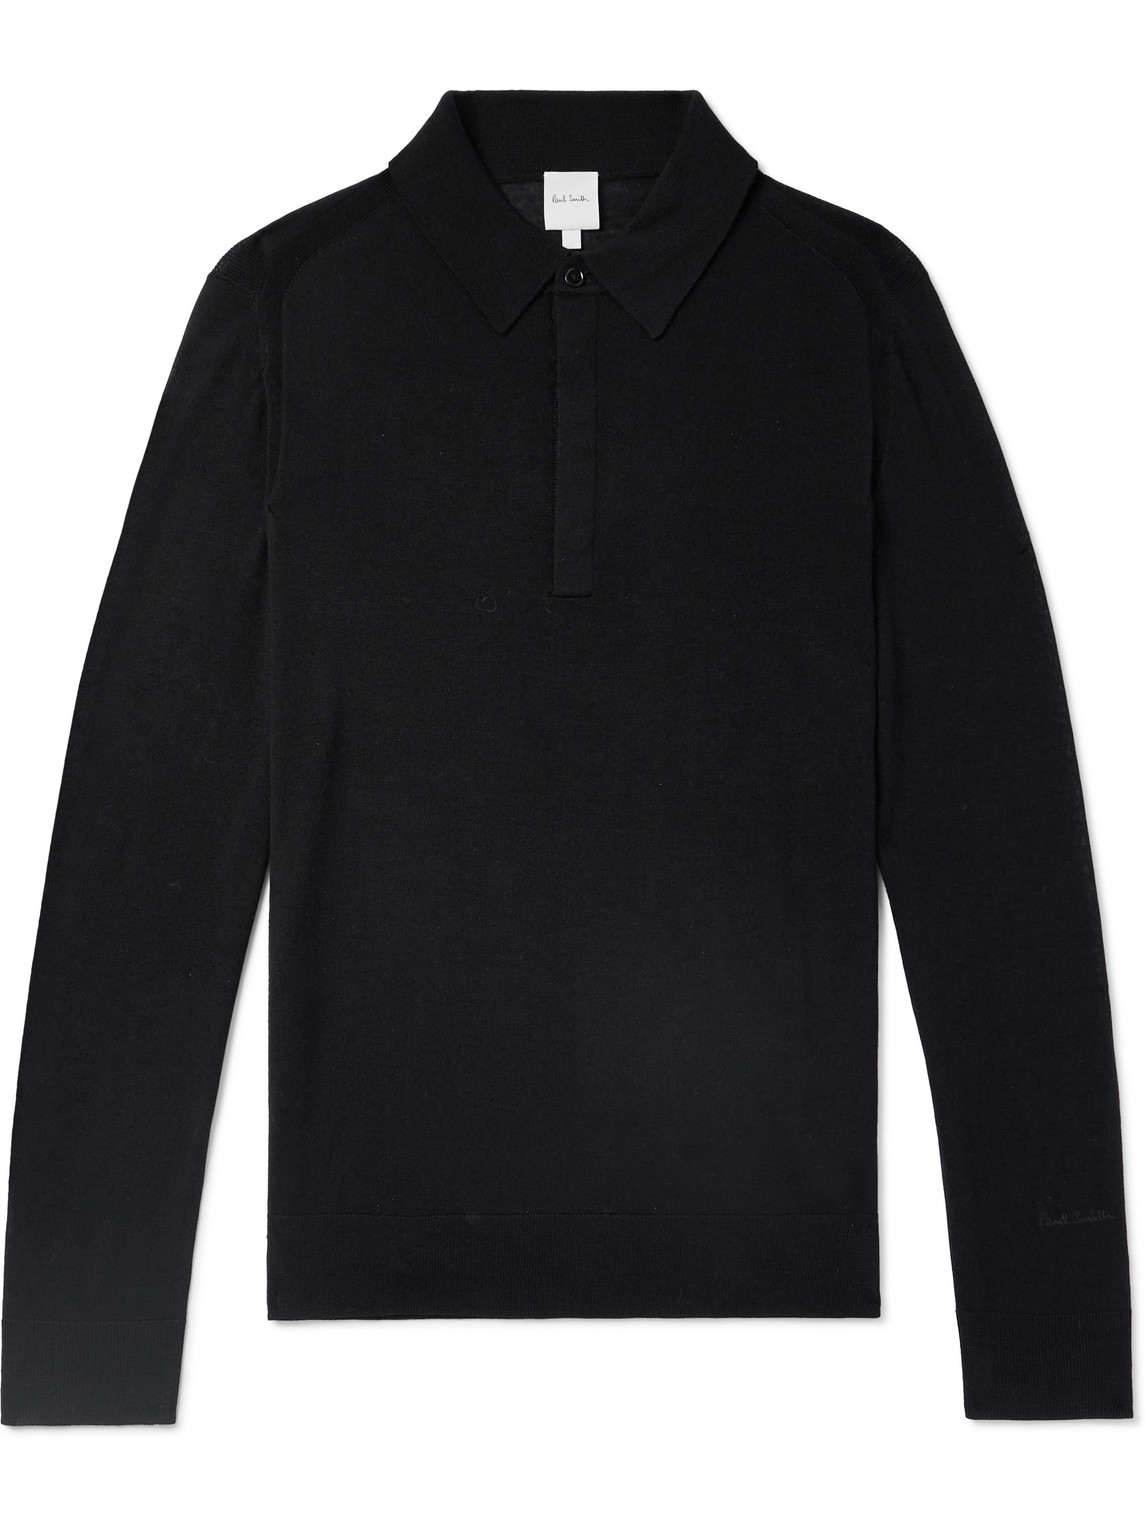 Paul Smith Embroidered Merino Wool Polo Shirt In Black